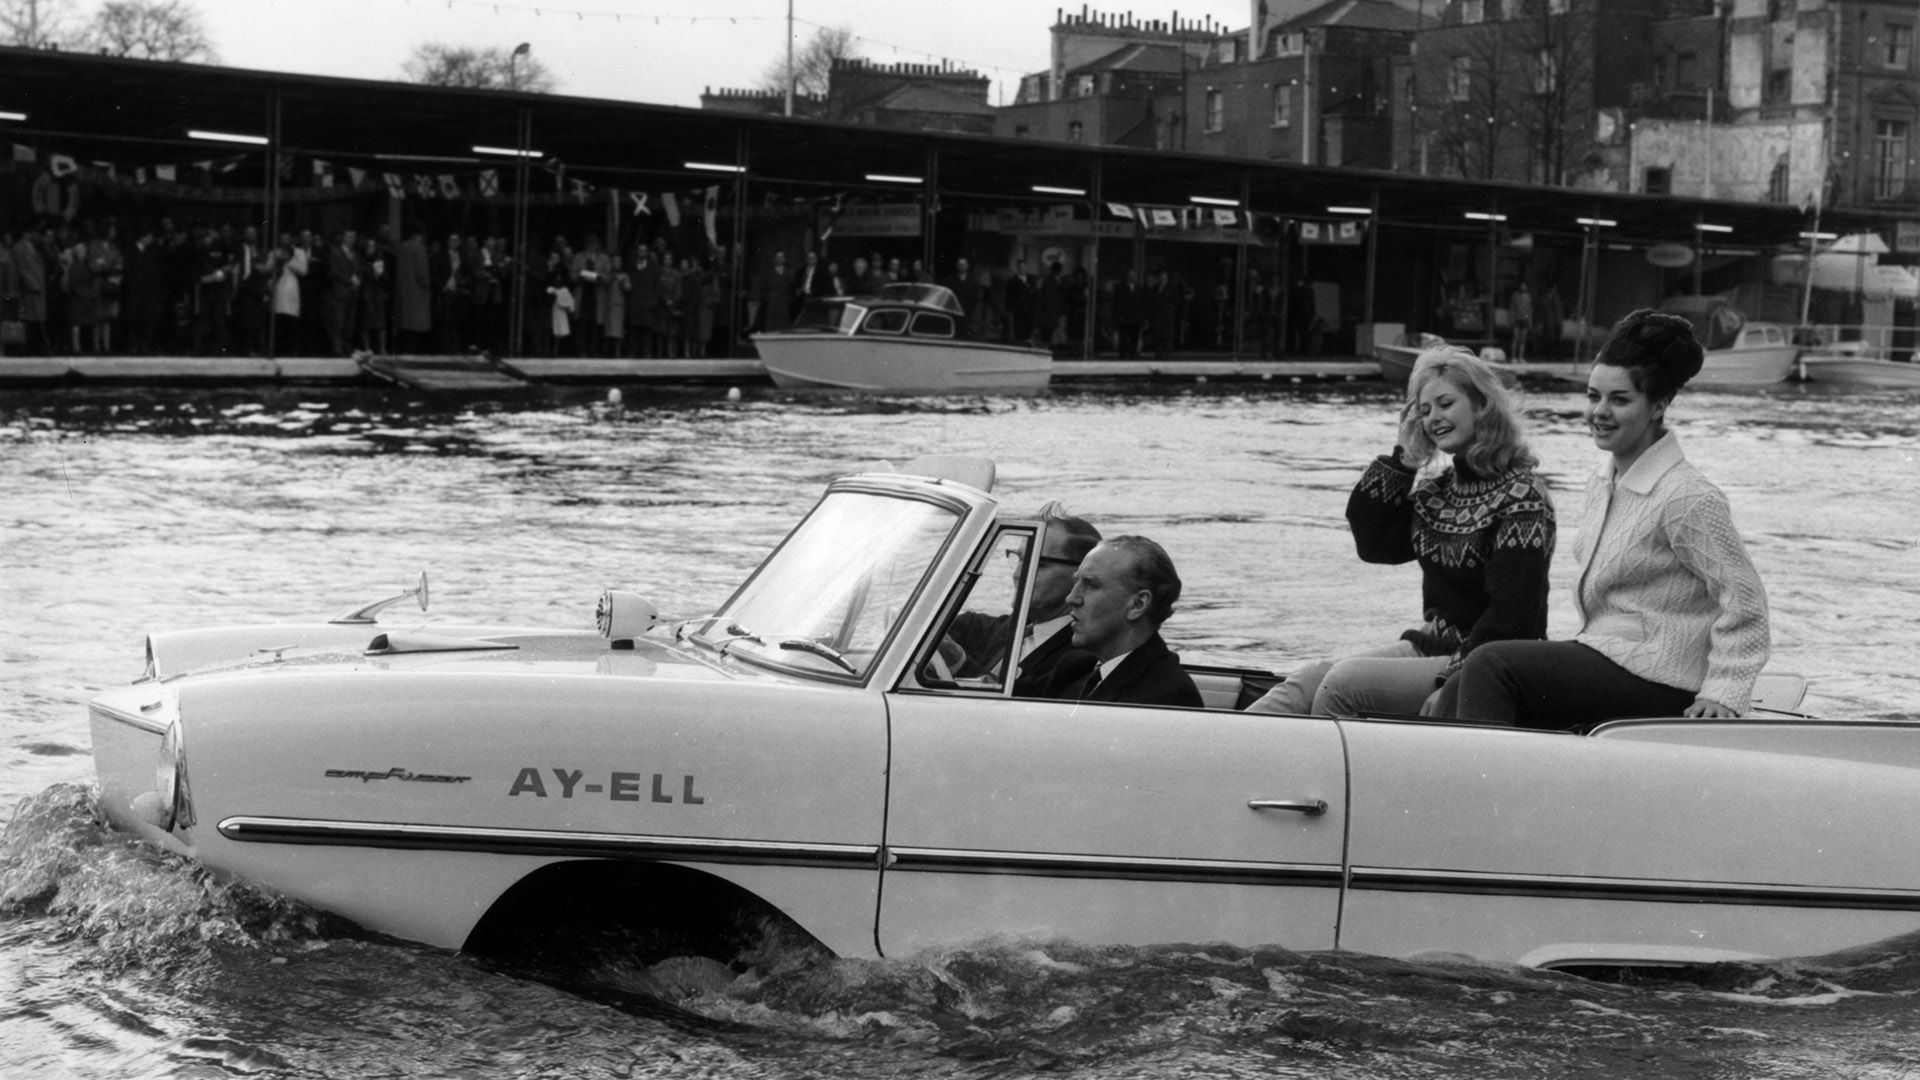 UK-Transport-Minister-Ernest-Marples-and-some-eye-candy-travelling-in-the-Triumph-powered-German-Amphicar-at-Little-Venice-on-the-Regents-Canal-London.-April-1964.jpg